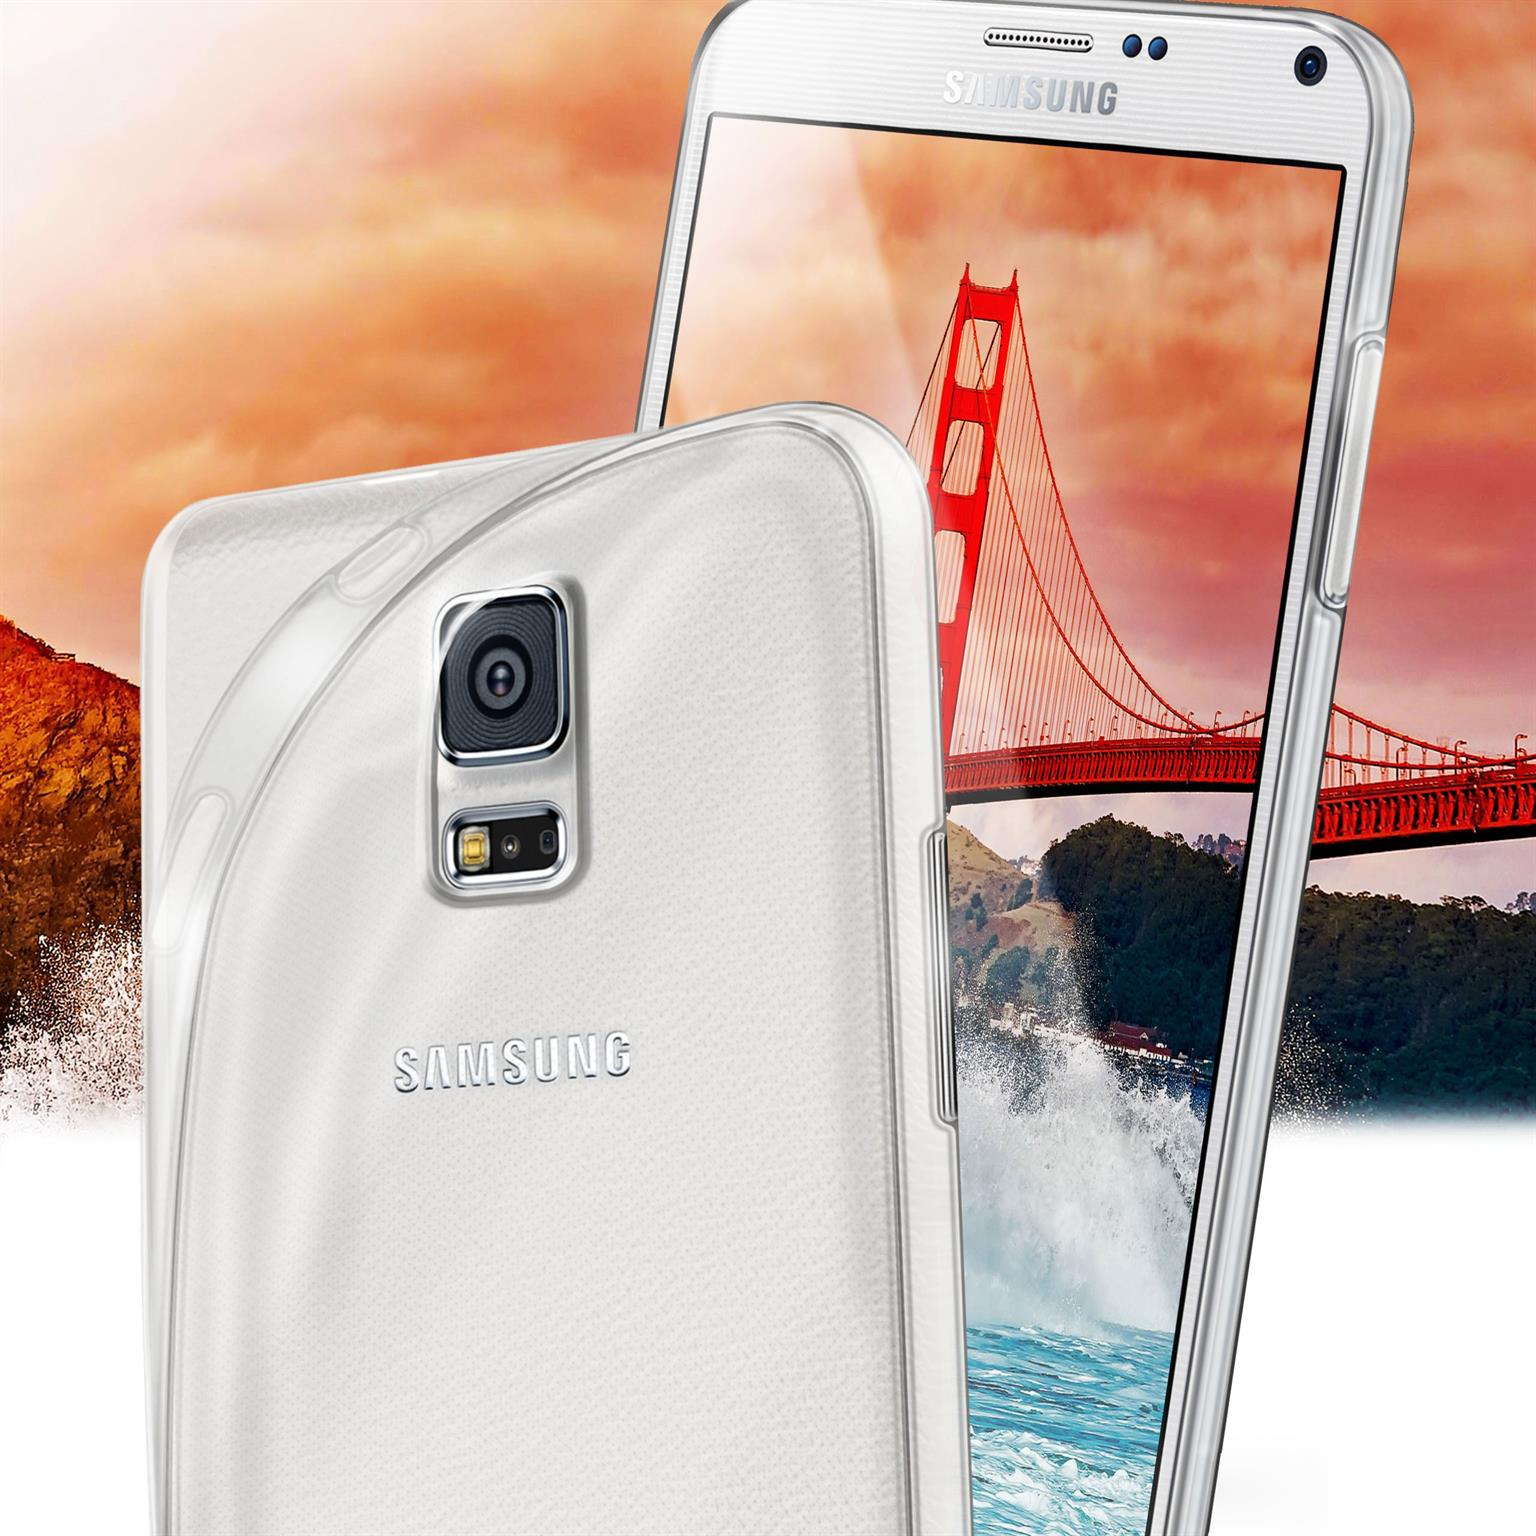 MOEX 4, Backcover, Note Galaxy Case, Crystal-Clear Aero Samsung,